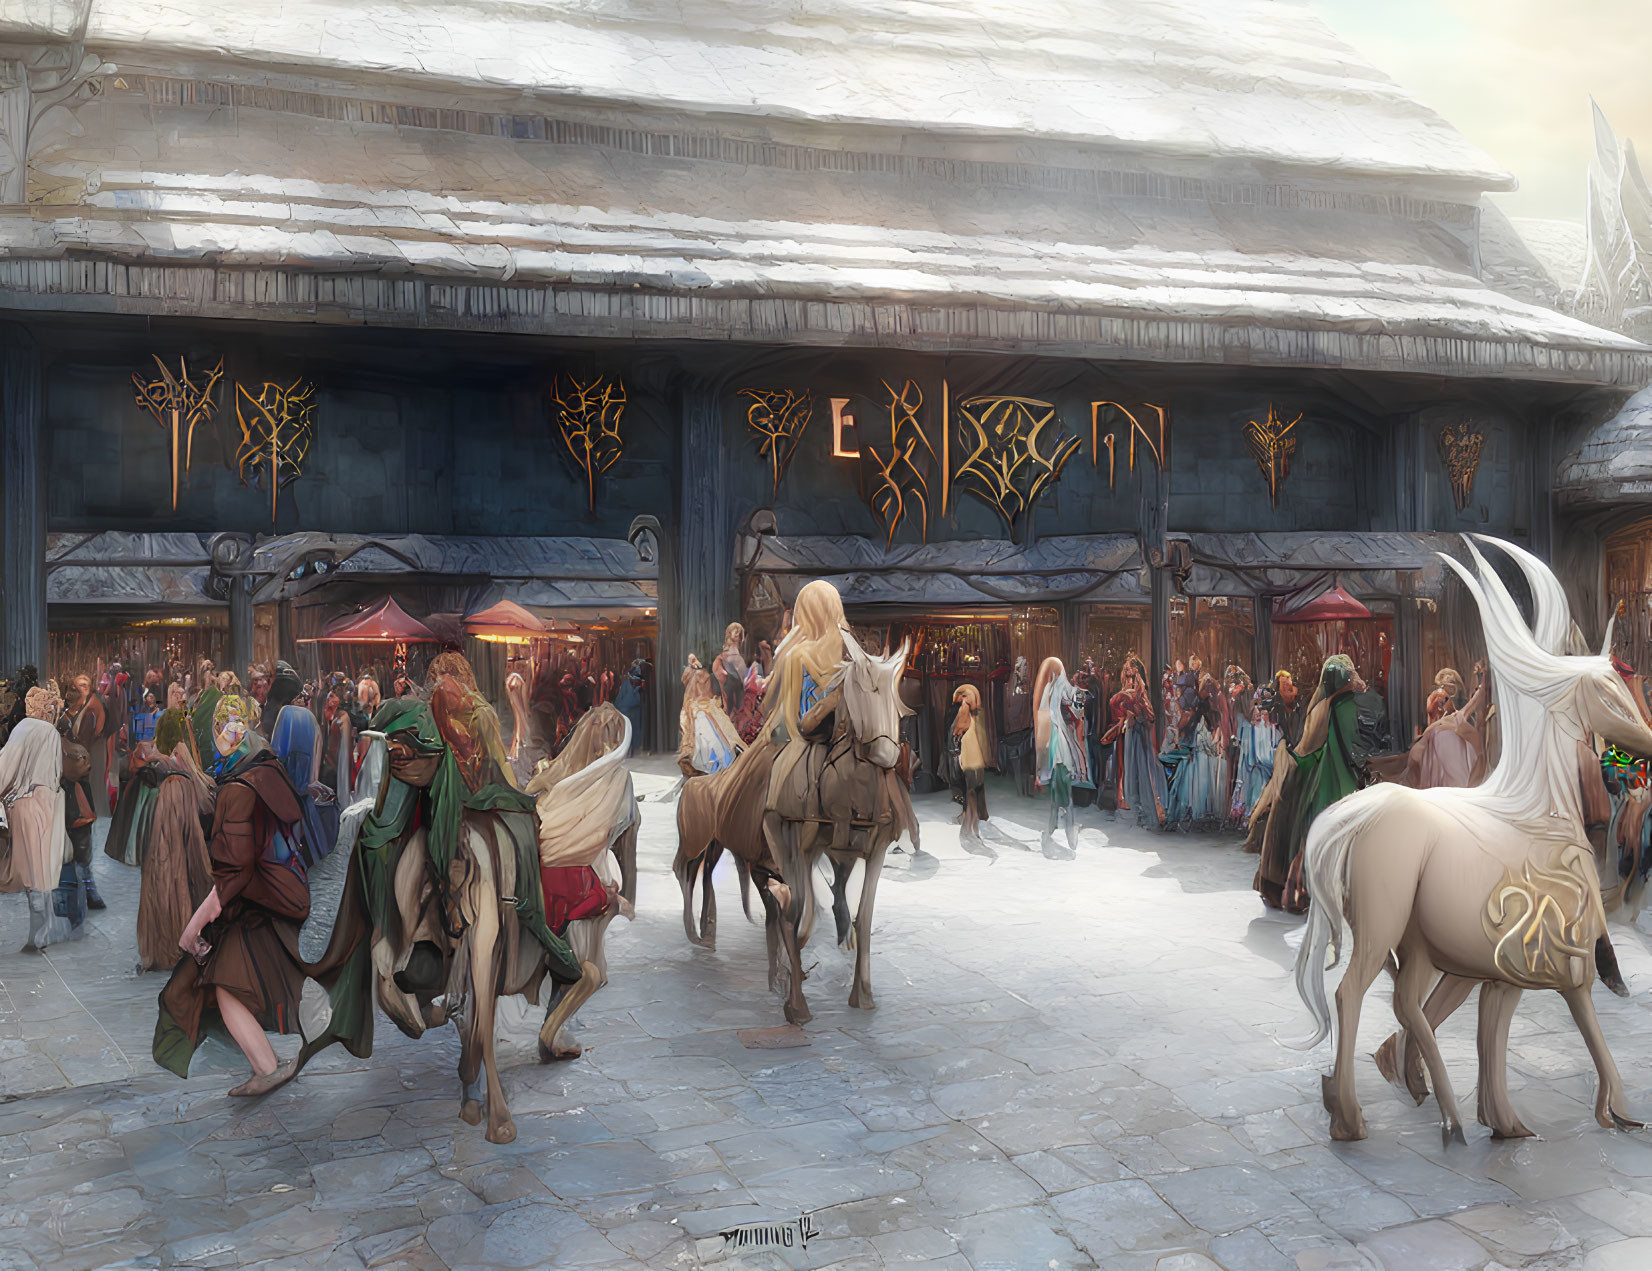 Medieval marketplace scene with people in period clothing and "LE ROY" building under snow-covered roof